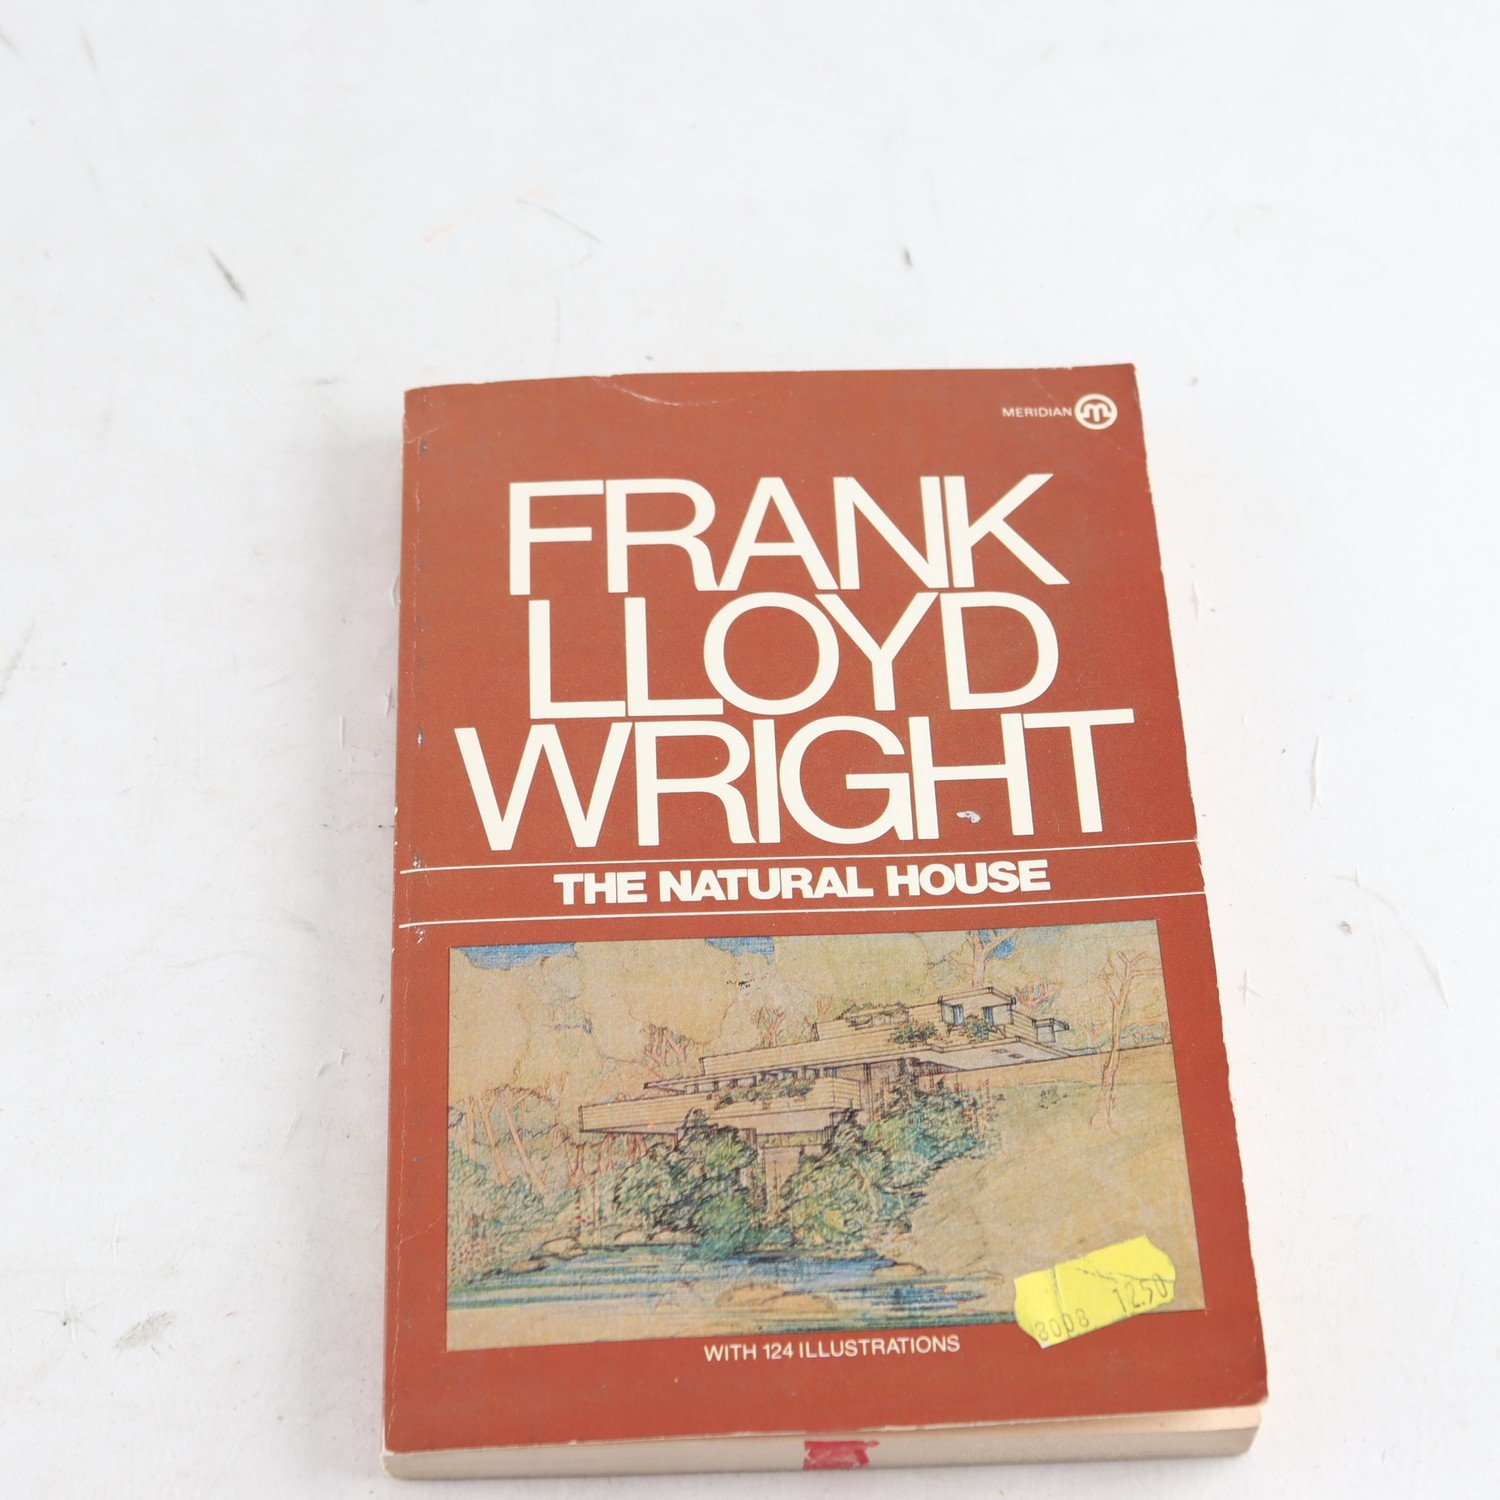 Frank Lloyd Wright, The Natural House